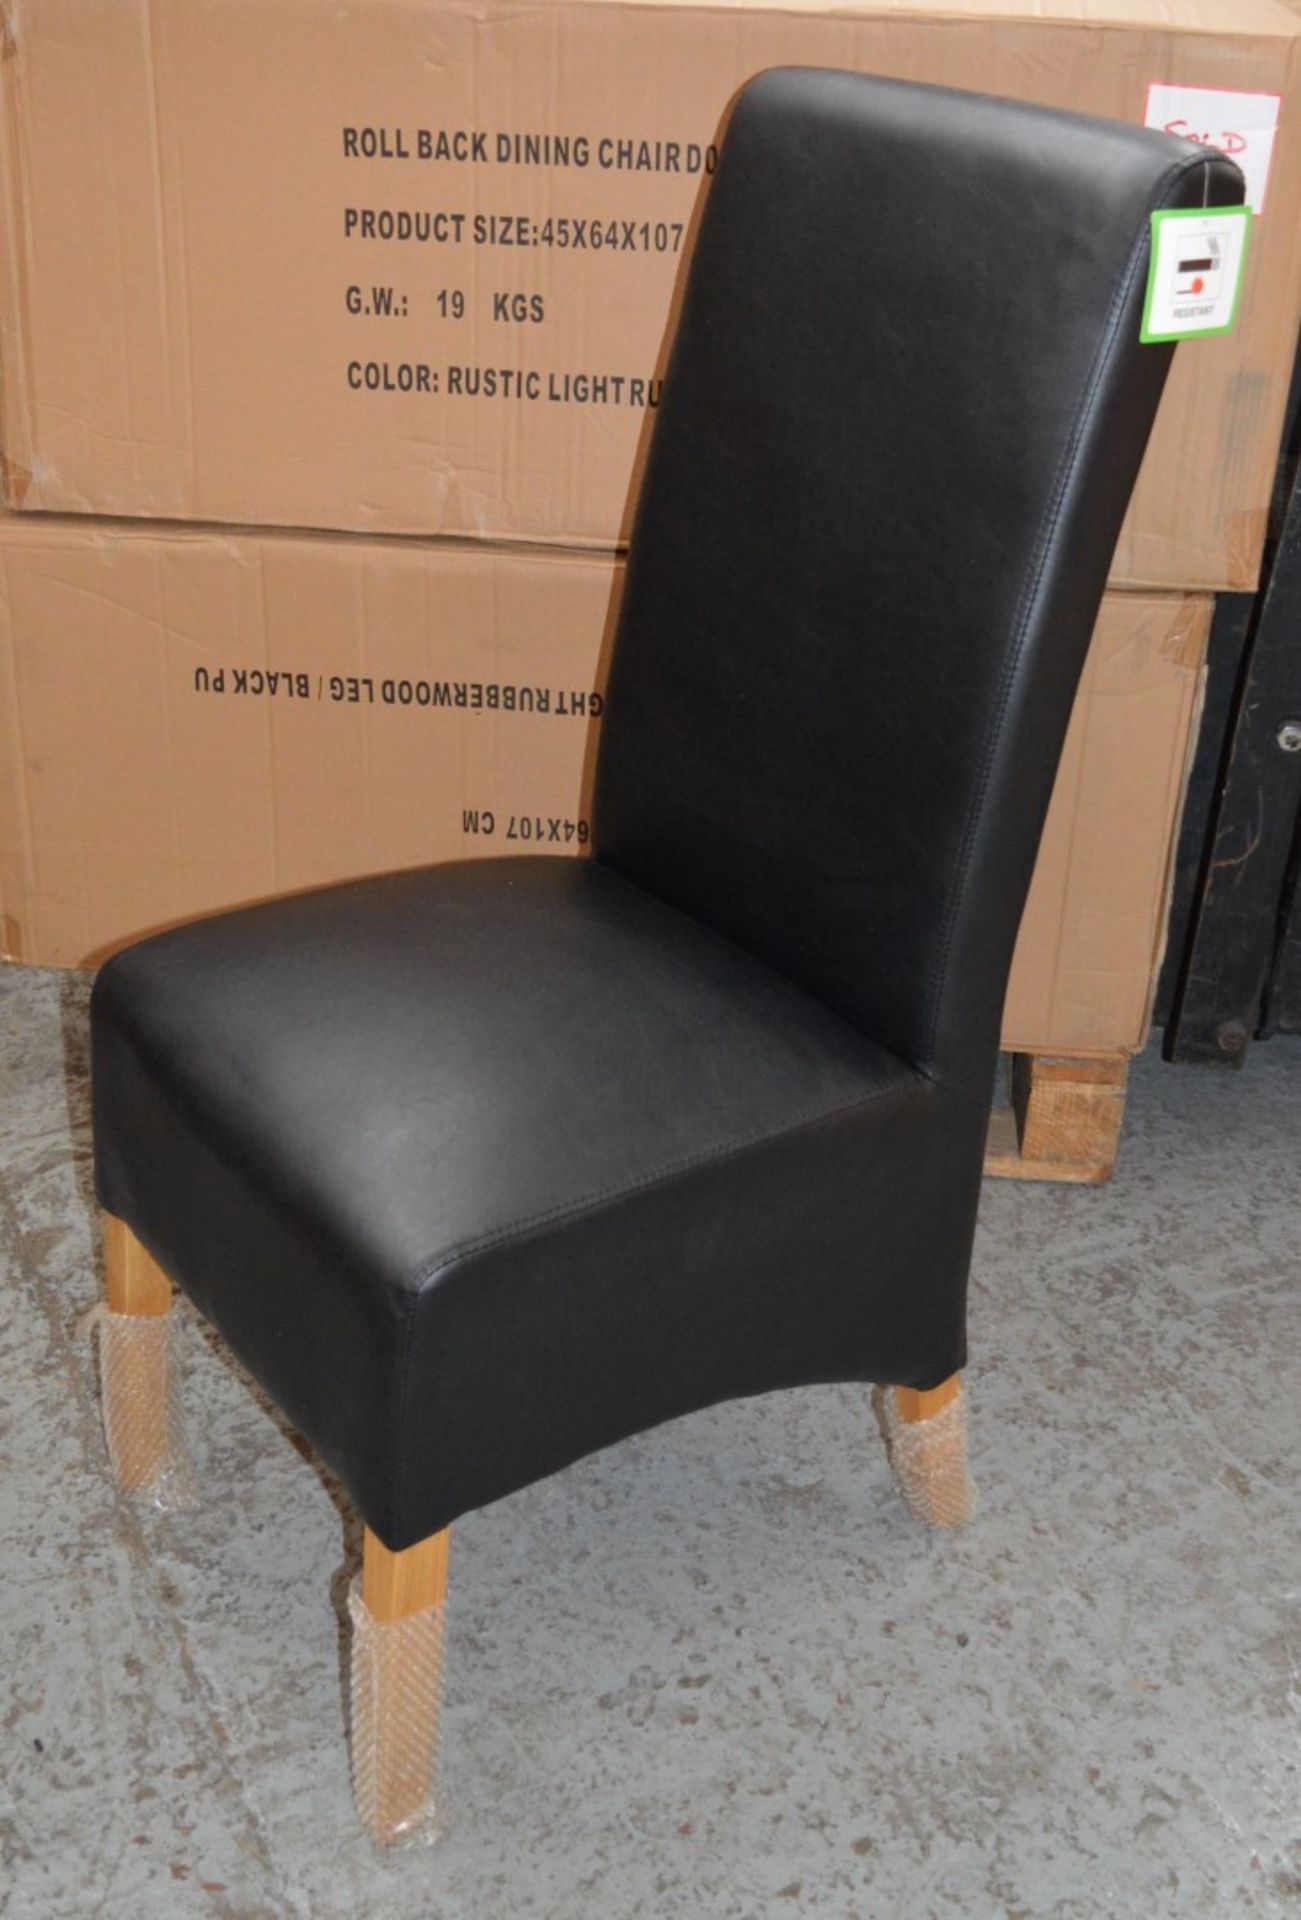 4 x Black Faux Leather Dining Chairs - Seating Dimensions: W44 x D60 x Height 106cm, Seat Height 47c - Image 2 of 7